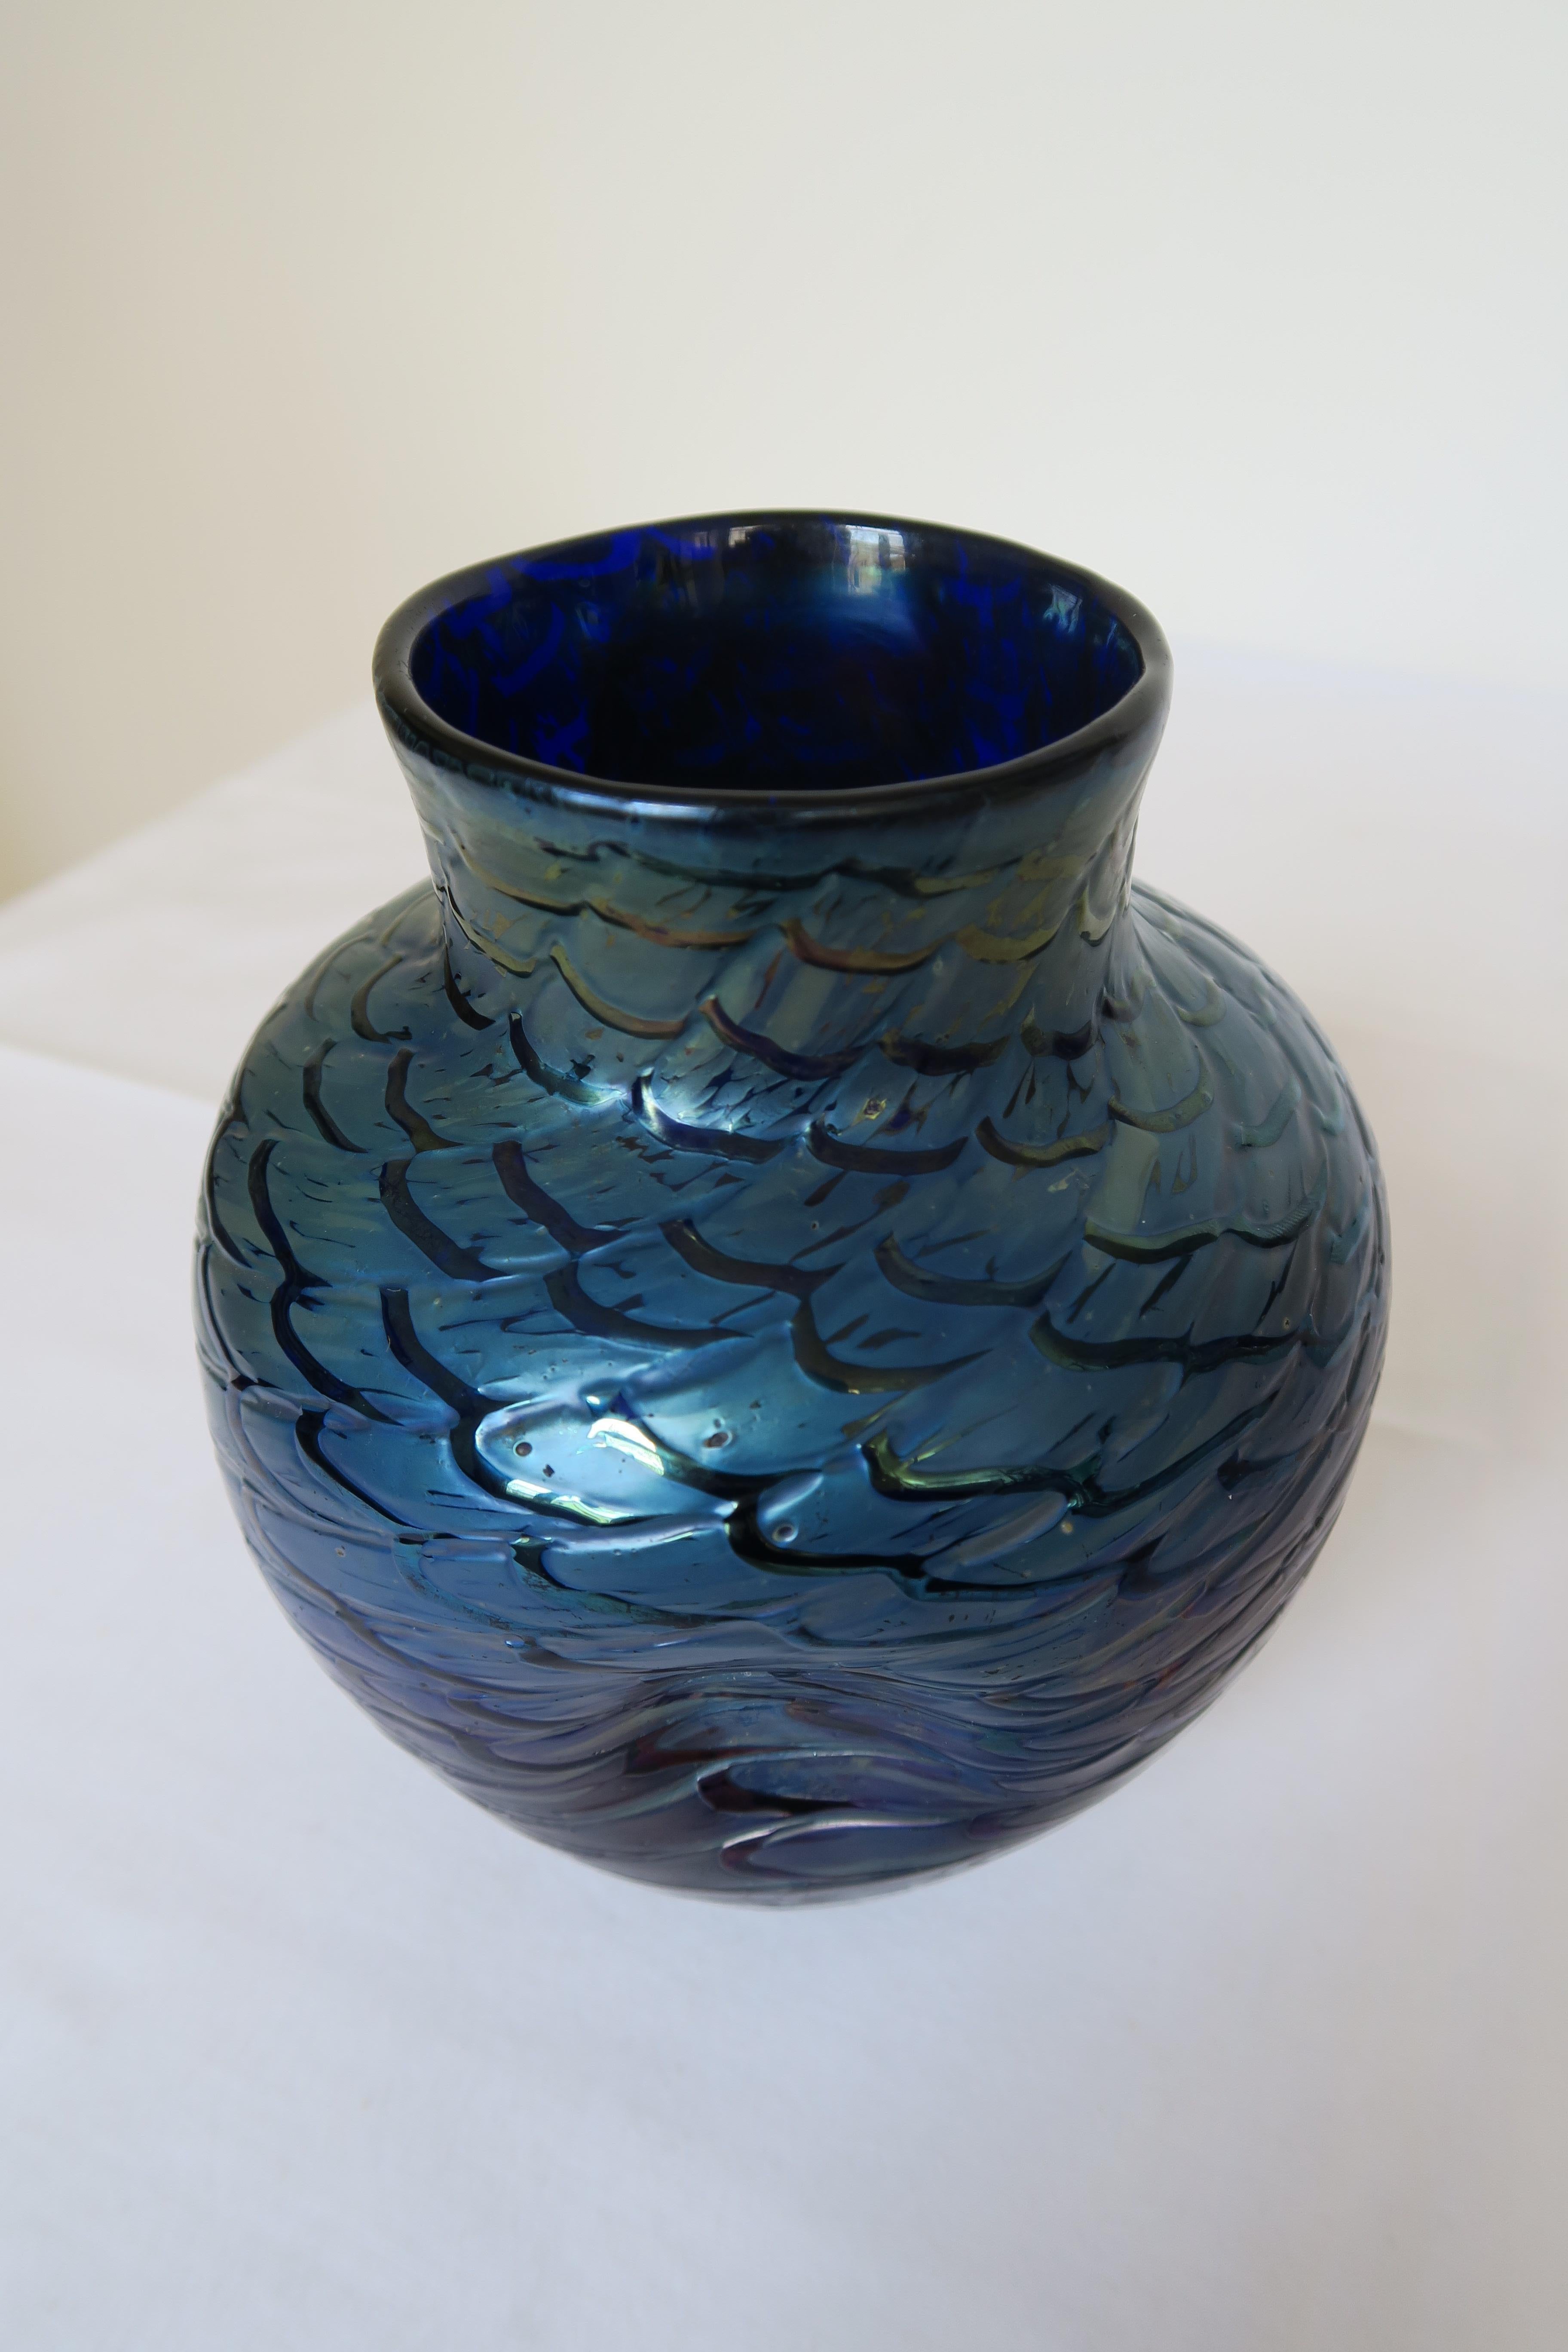 For sale in this advertisement is a very special object. It is a glass vase, crafted in Bohemia between 1905 and 1910. It shimmers in cobalt blue and silver-yellow glass. The clear, colourless glass-fibers diagonally woven around the vase make it